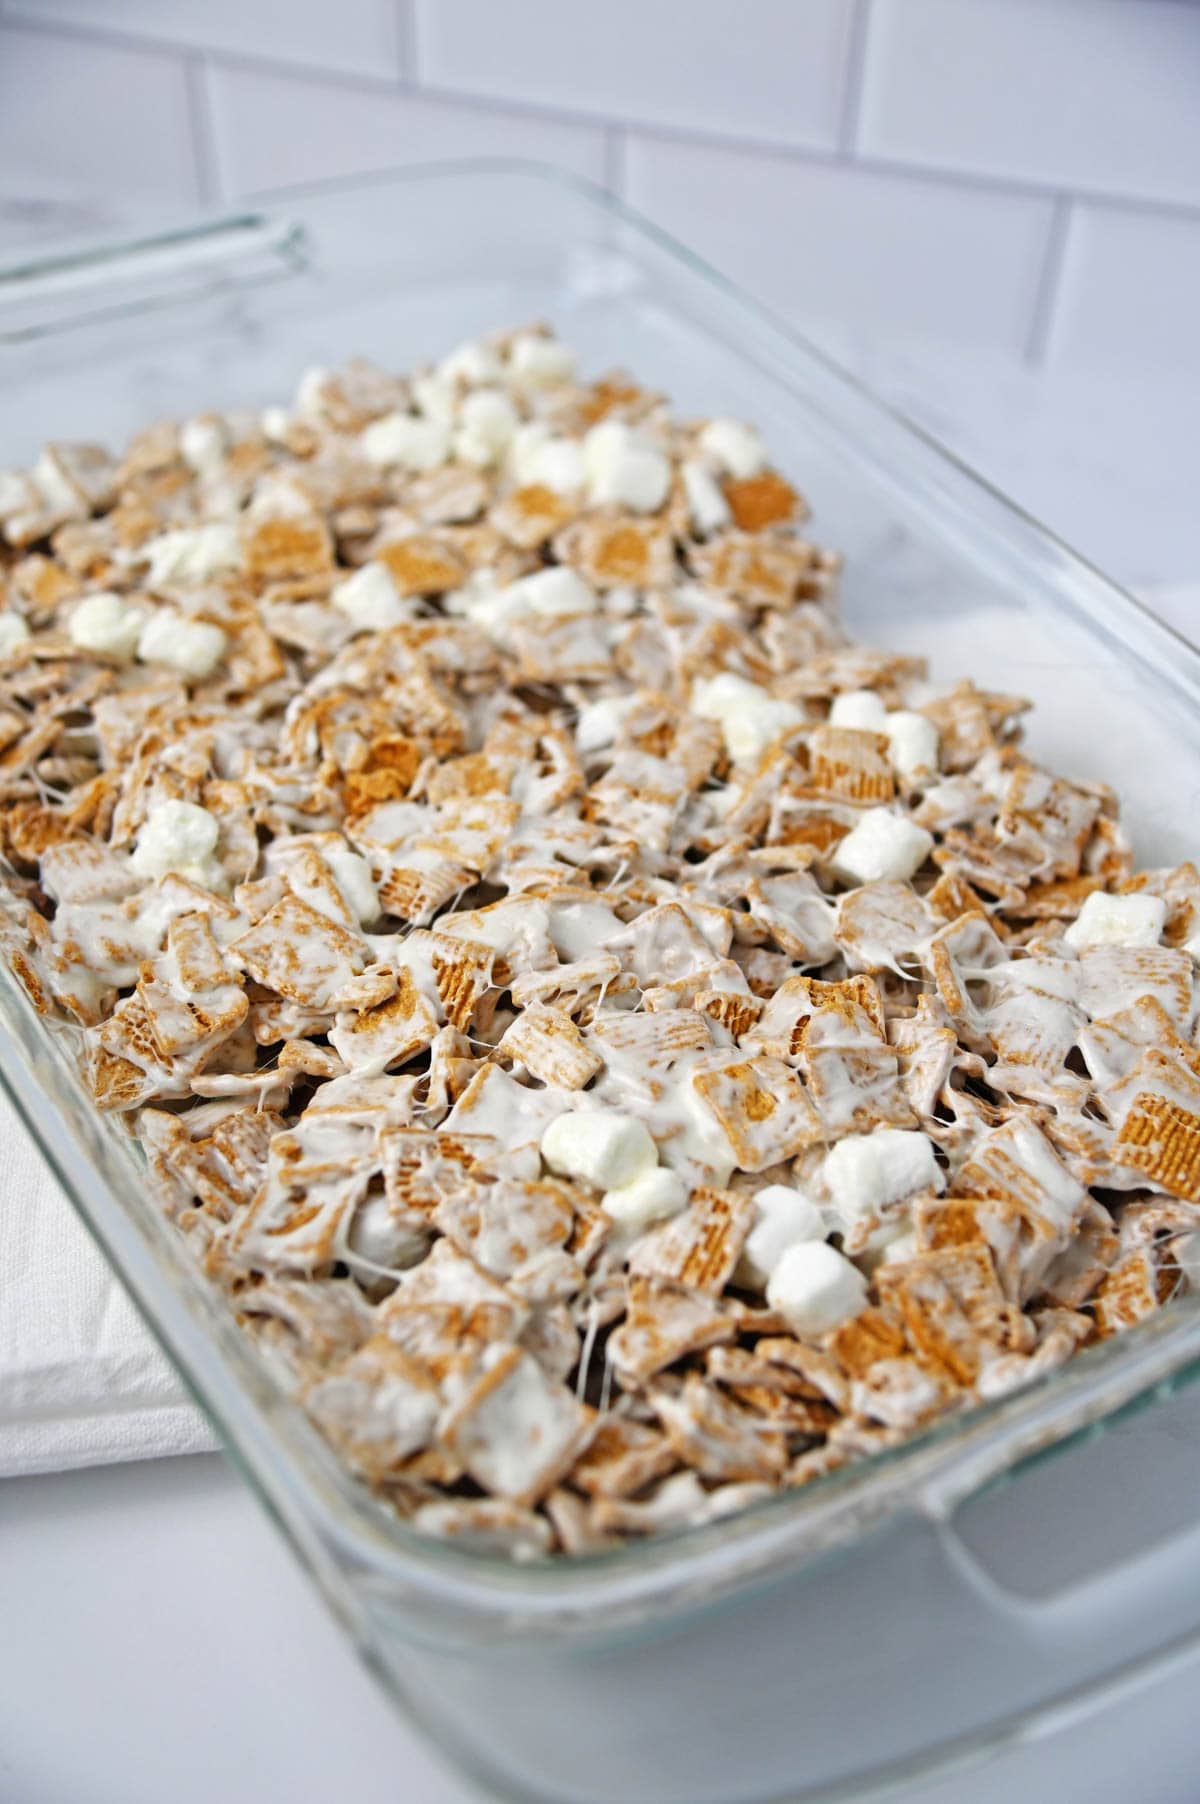 Second layer of Golden Grahams cereal mixture